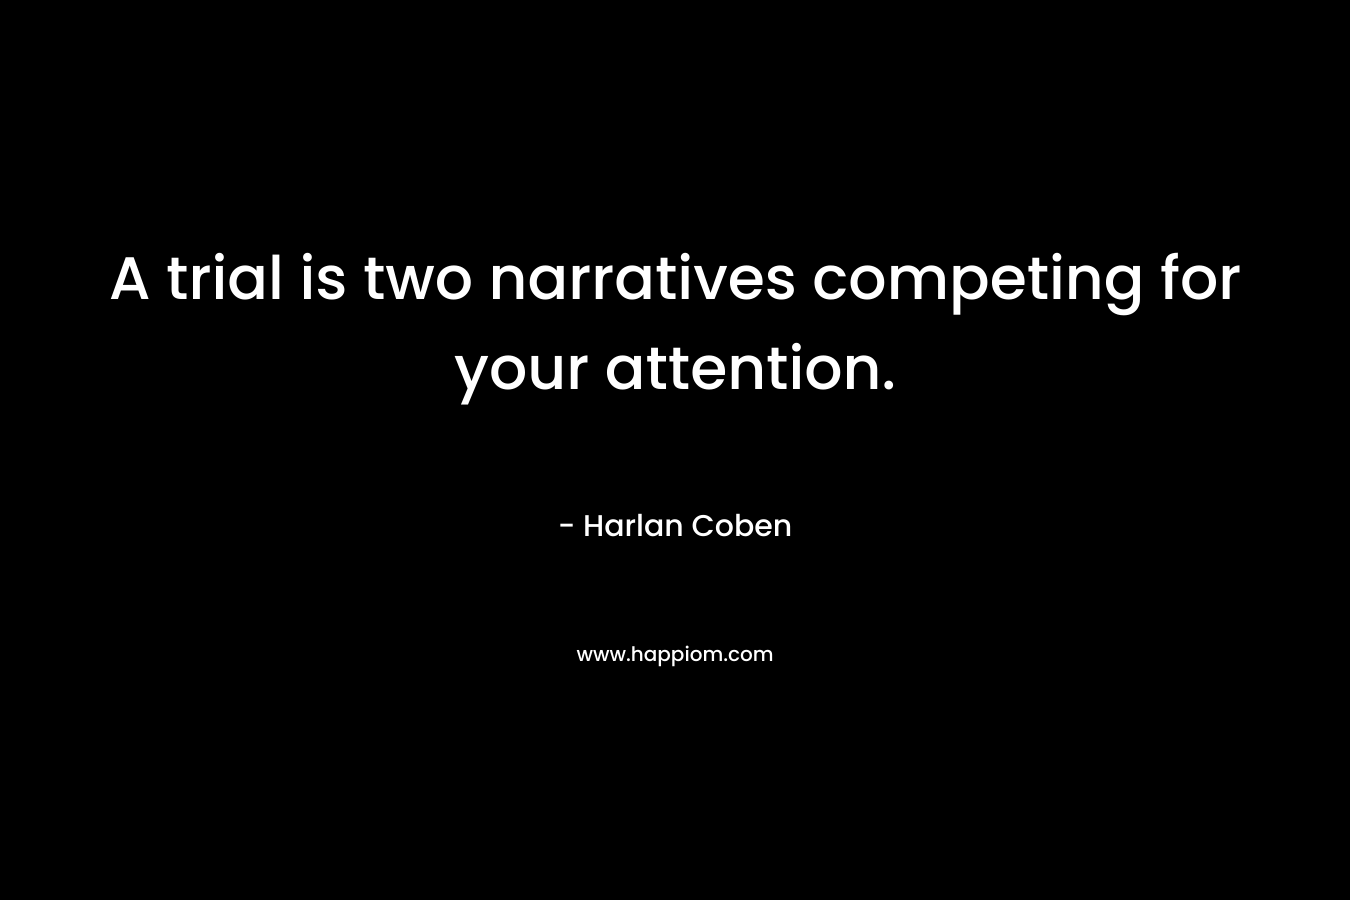 A trial is two narratives competing for your attention. – Harlan Coben